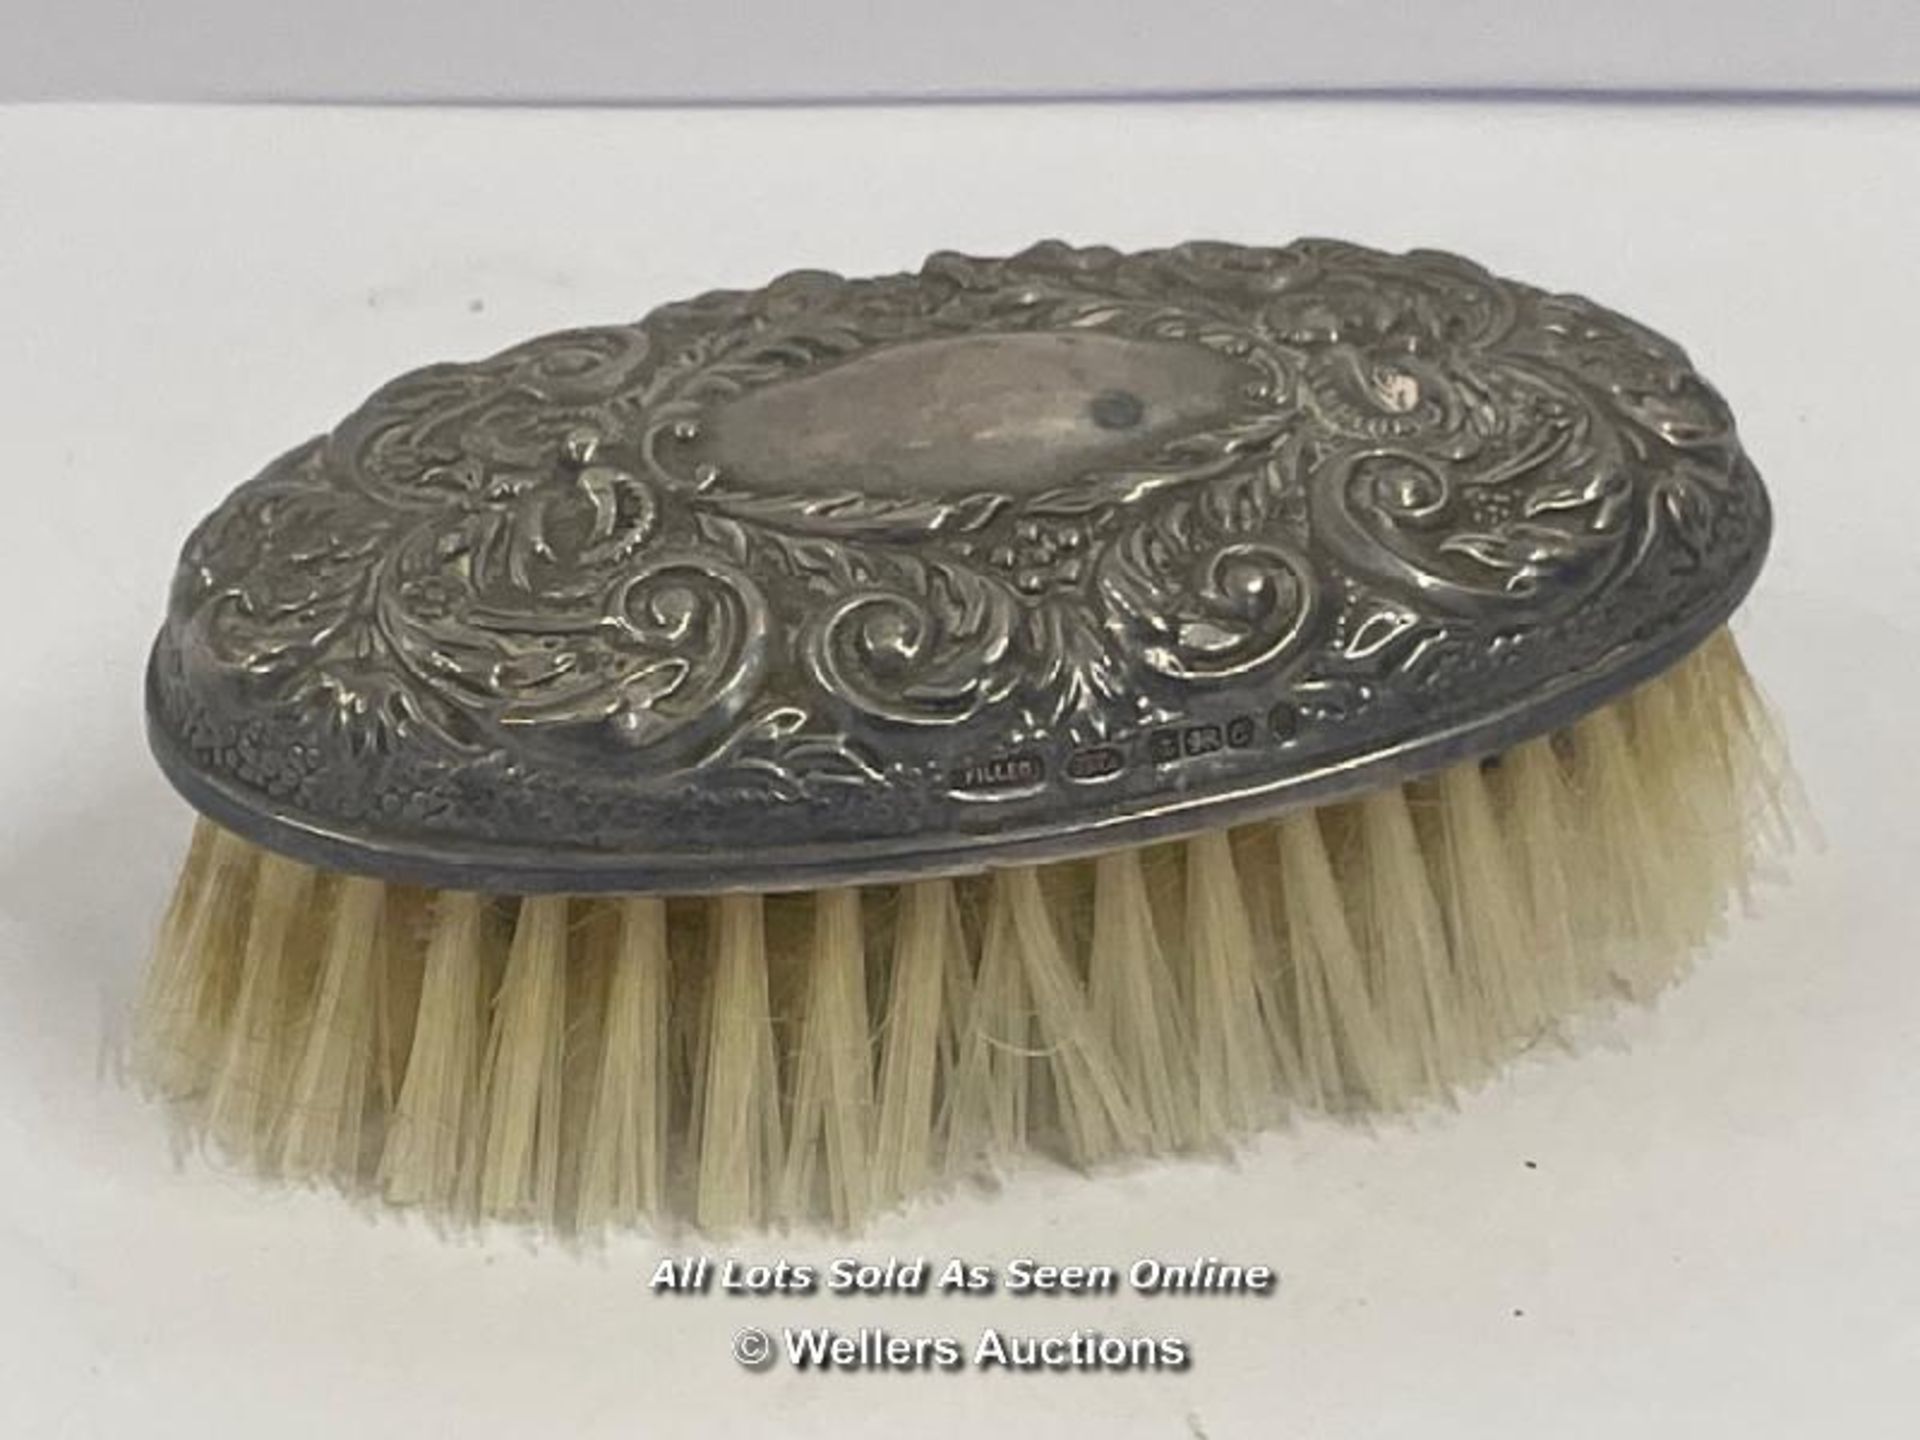 ASSORTED SILVER ITEMS INCLUDING DISHES, BRUSH, SPOONS AND PIN CUSHION AND 12K GOLD HAIR PIN (10) - Image 6 of 17